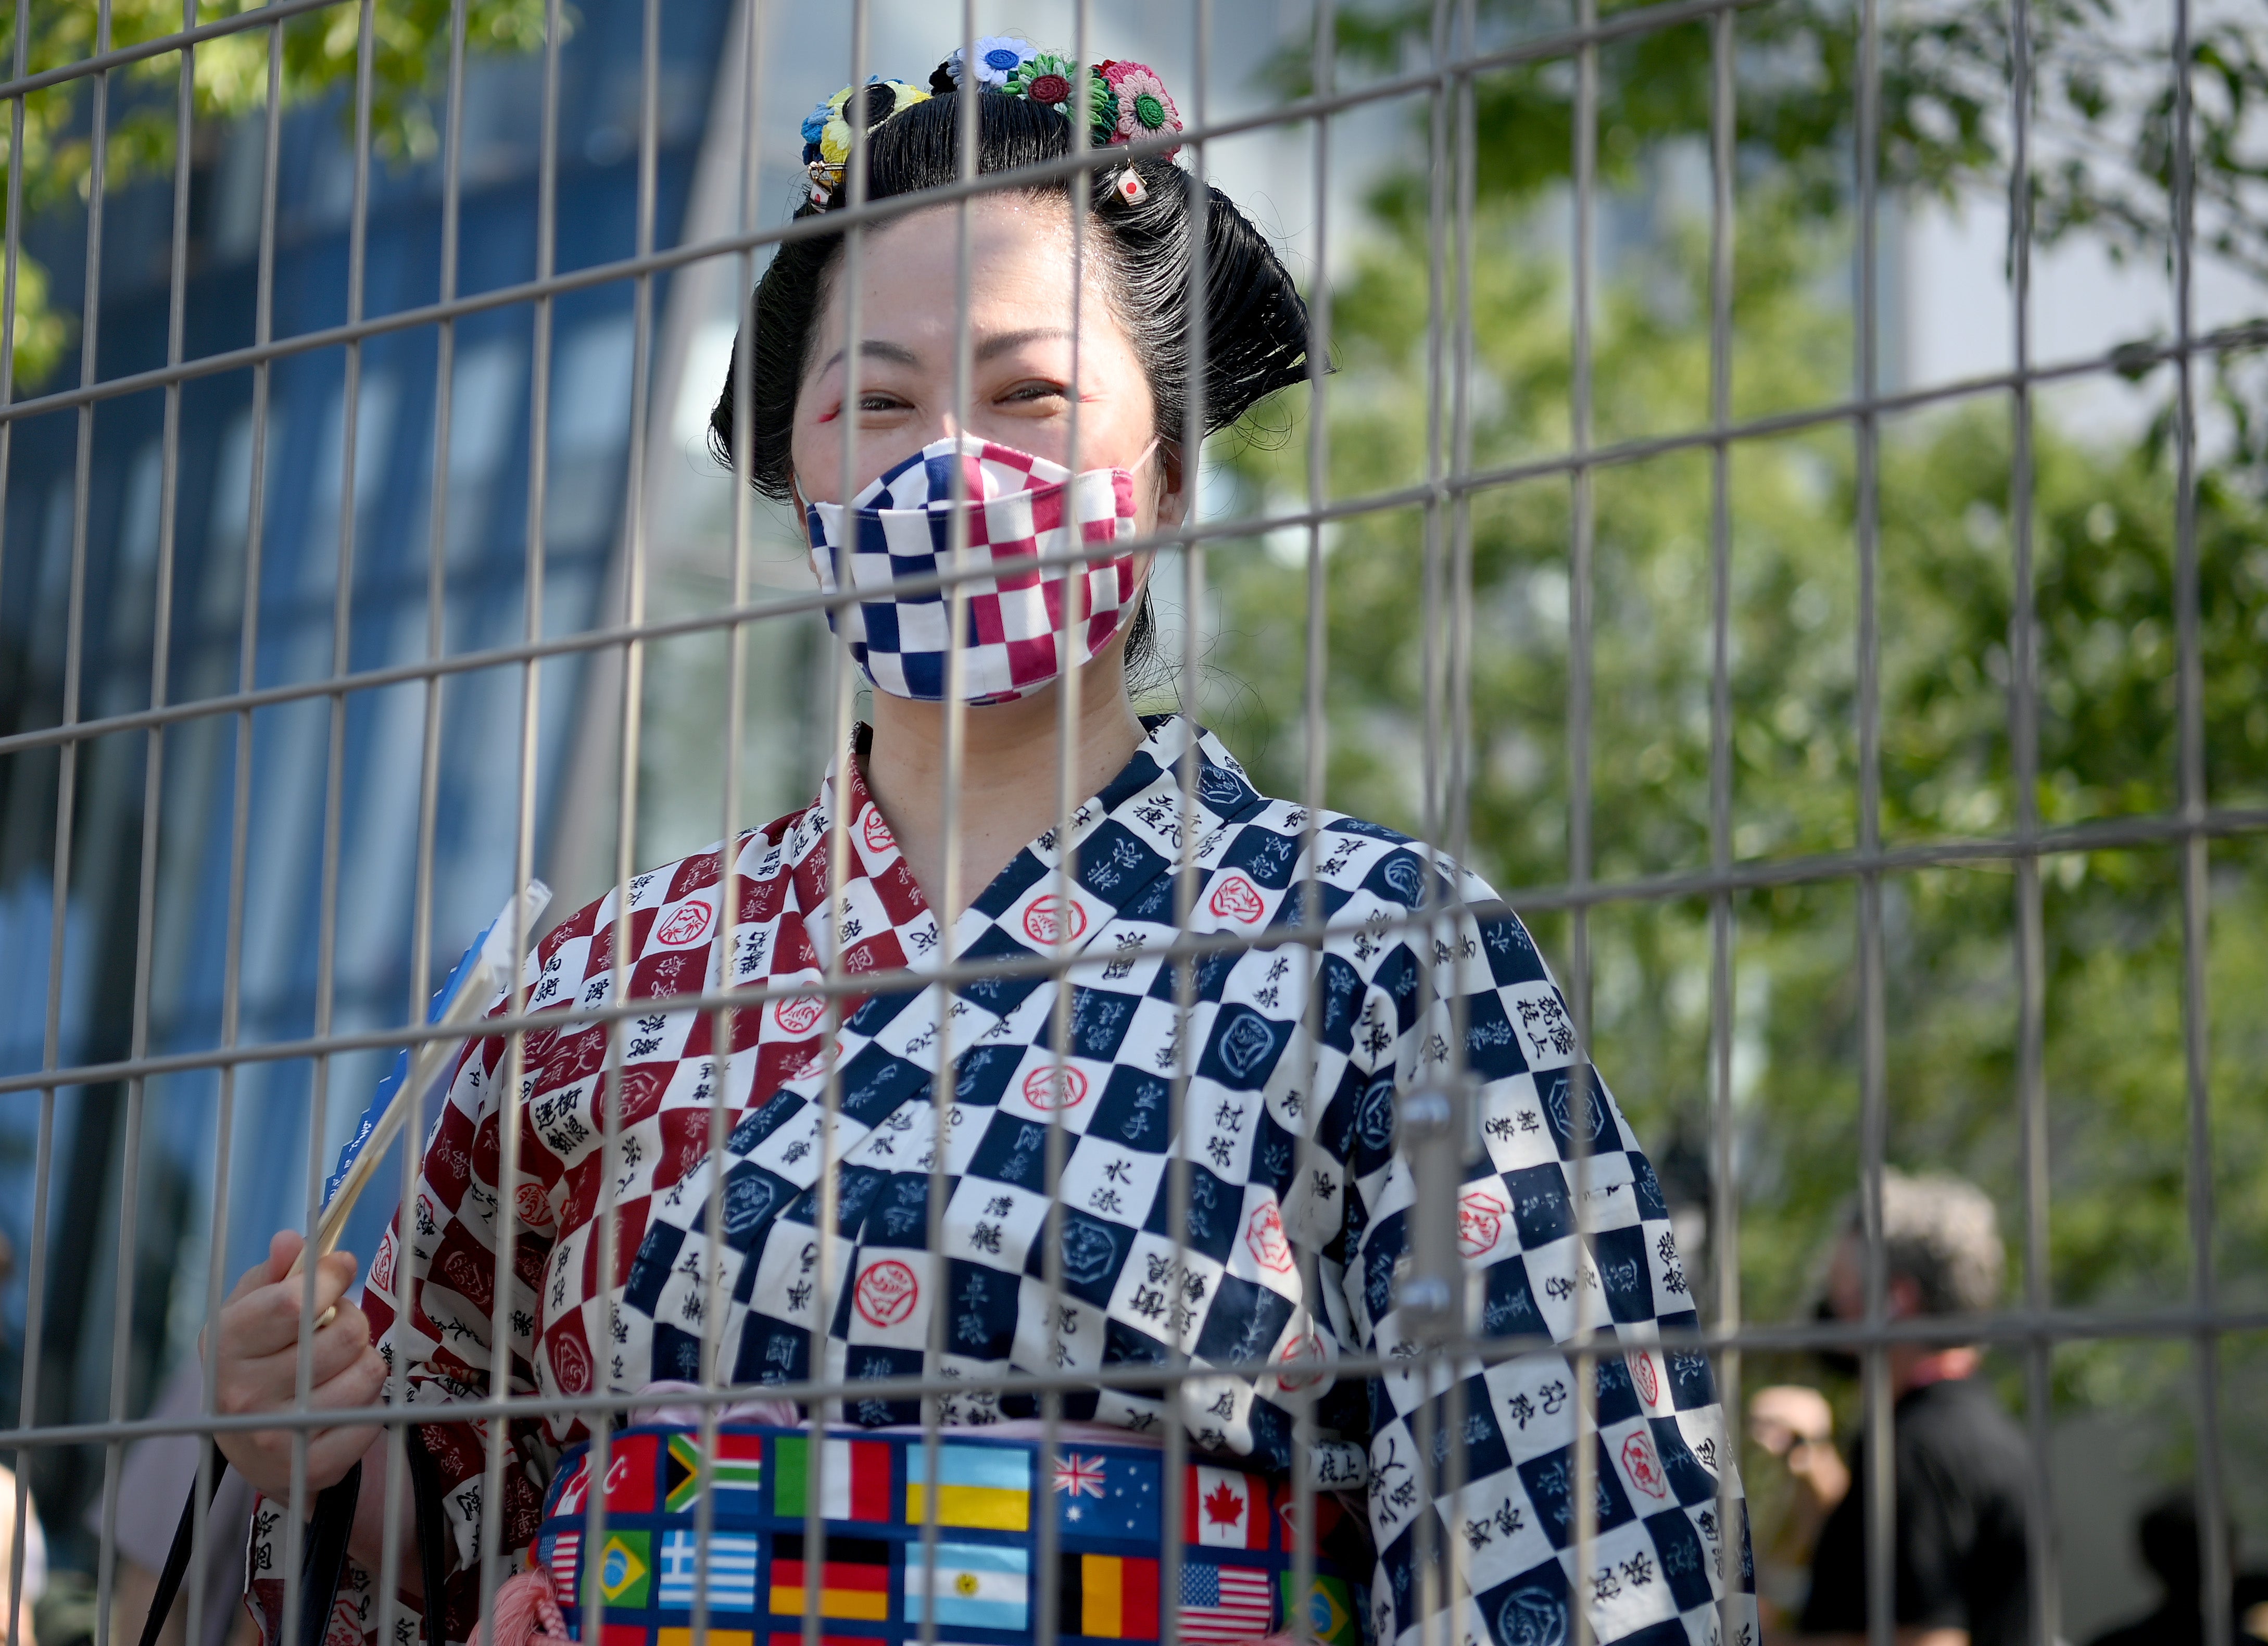 A woman in traditional clothing looks on from behind a fence prior to the Opening Ceremony of the Tokyo 2020 Olympic Games at Olympic Stadium